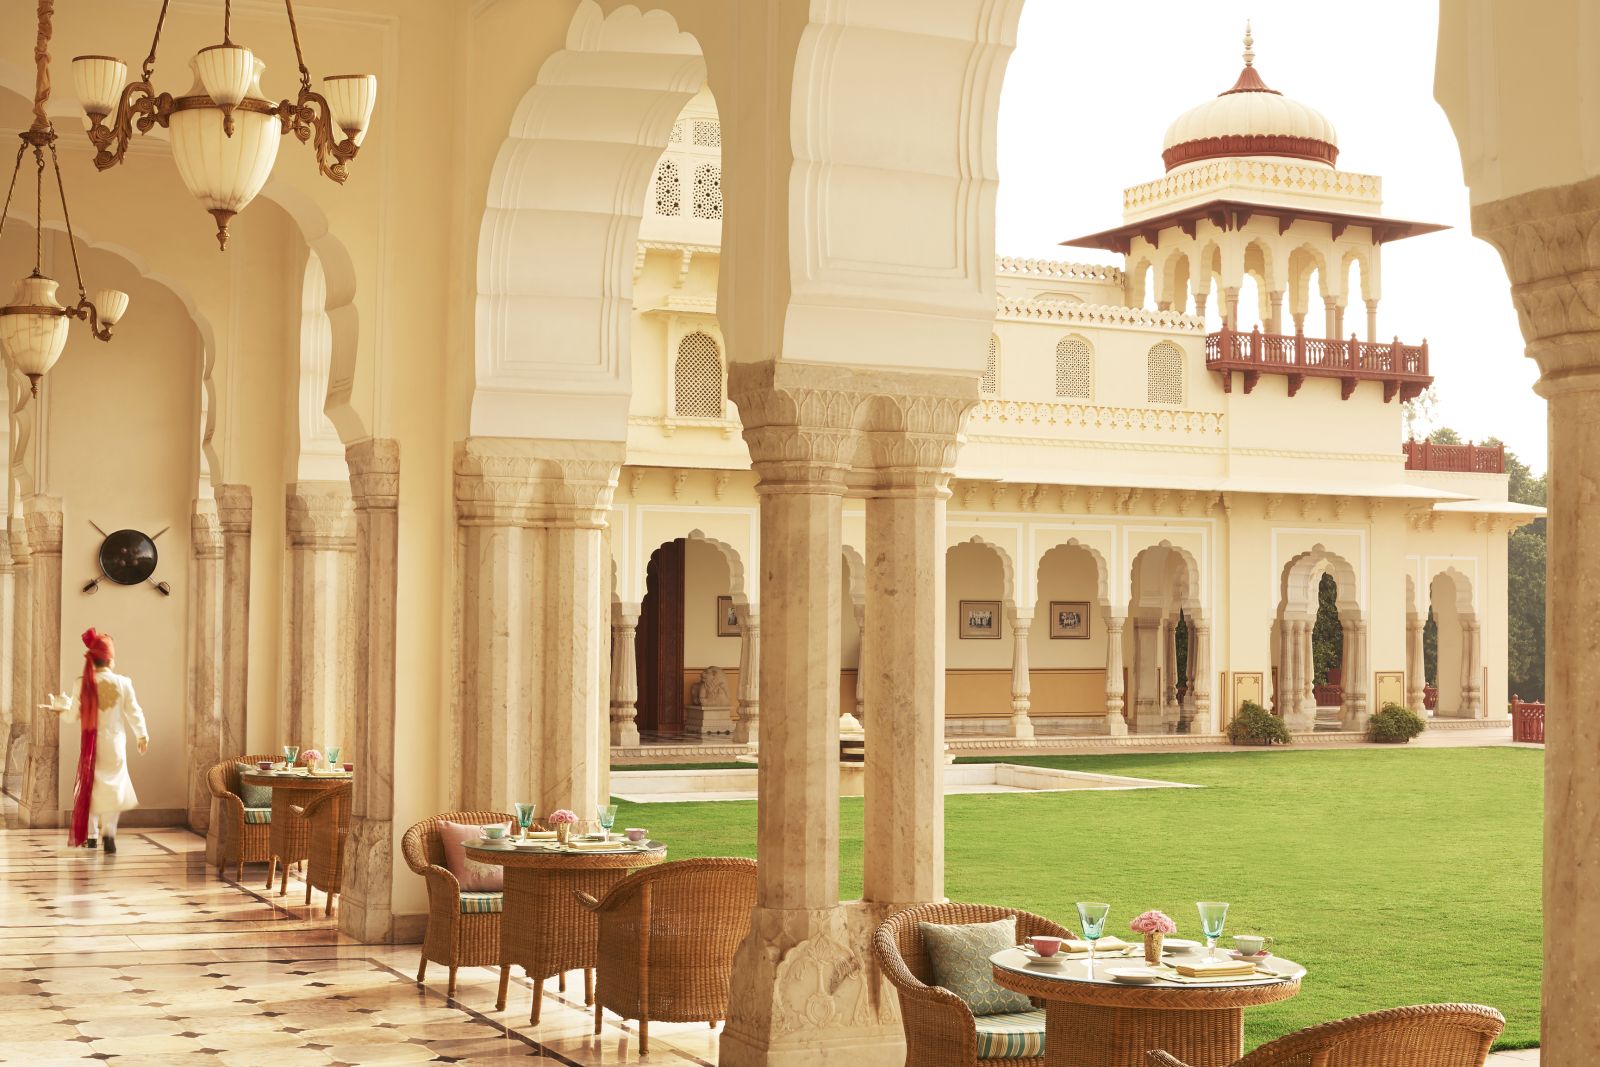 Verandah cafe and grounds at the Rambagh Palace in Jaipur